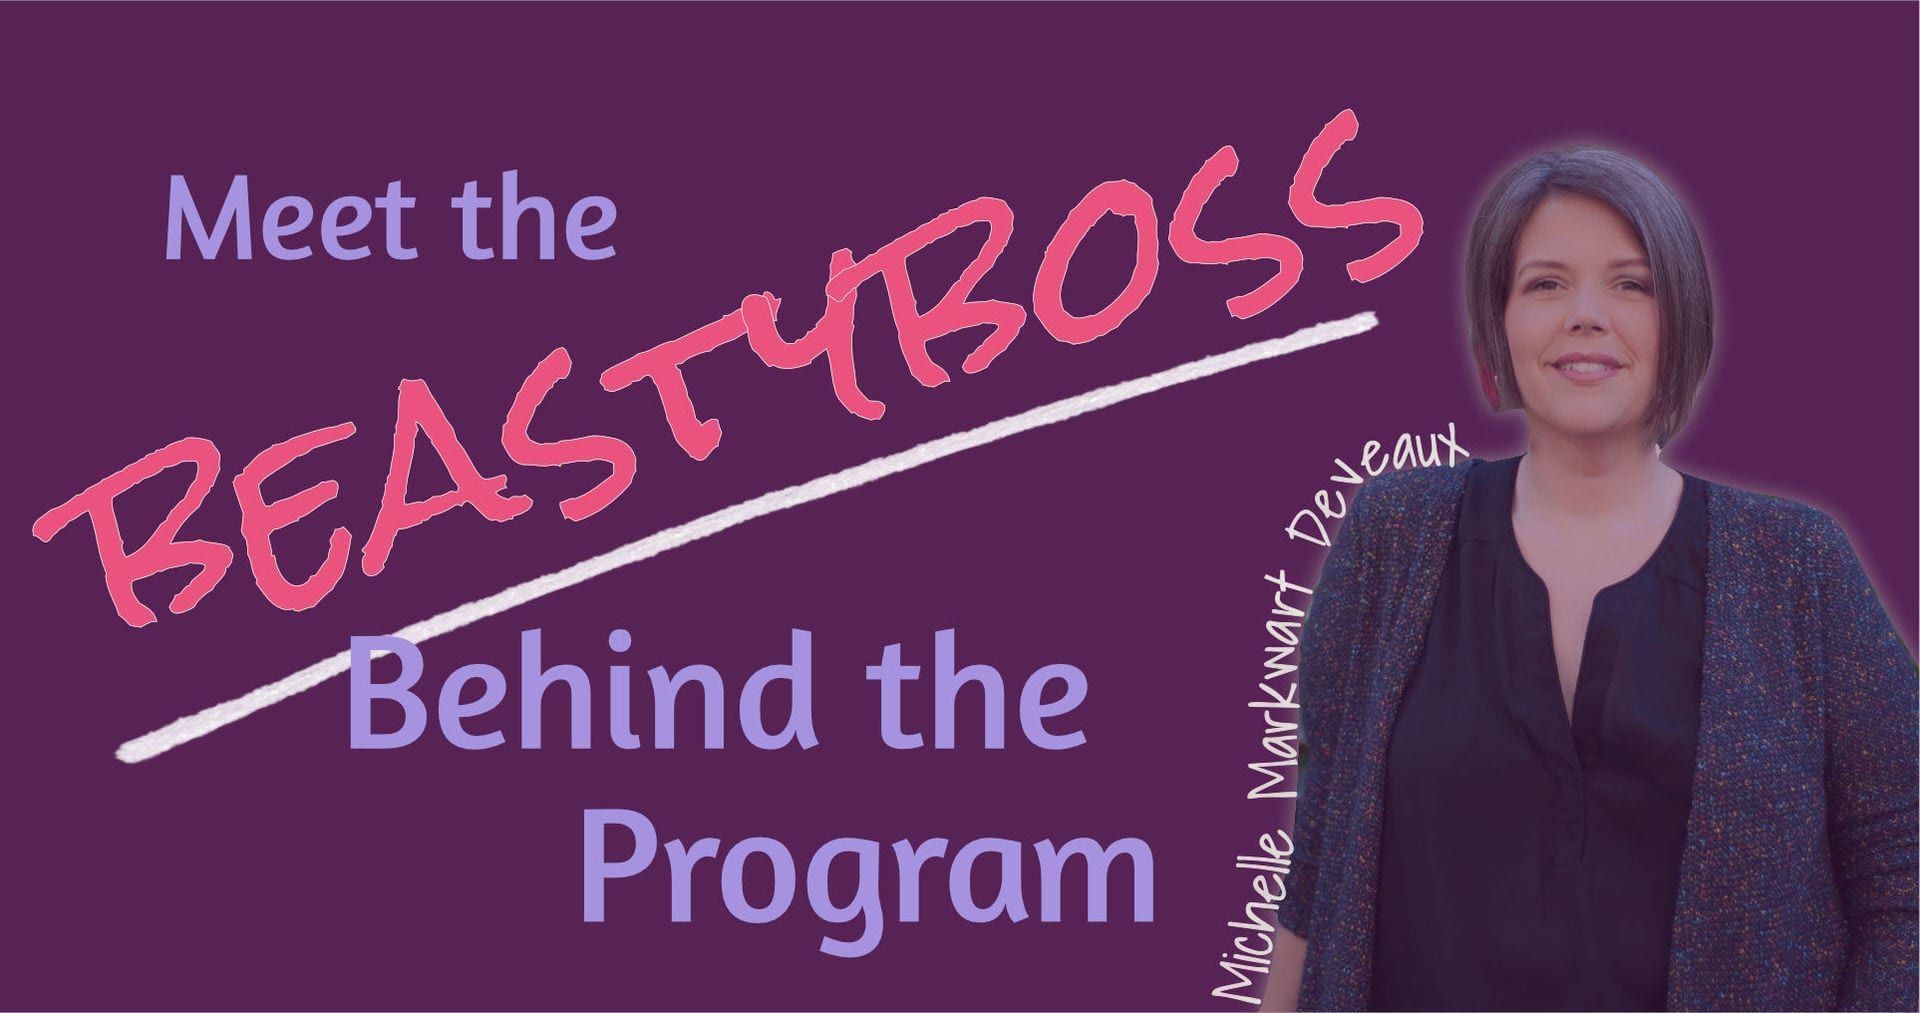 Meet the BEASTYBOSS Behind the Program "How to Run Your Voice Biz Without Hating Your Boss"